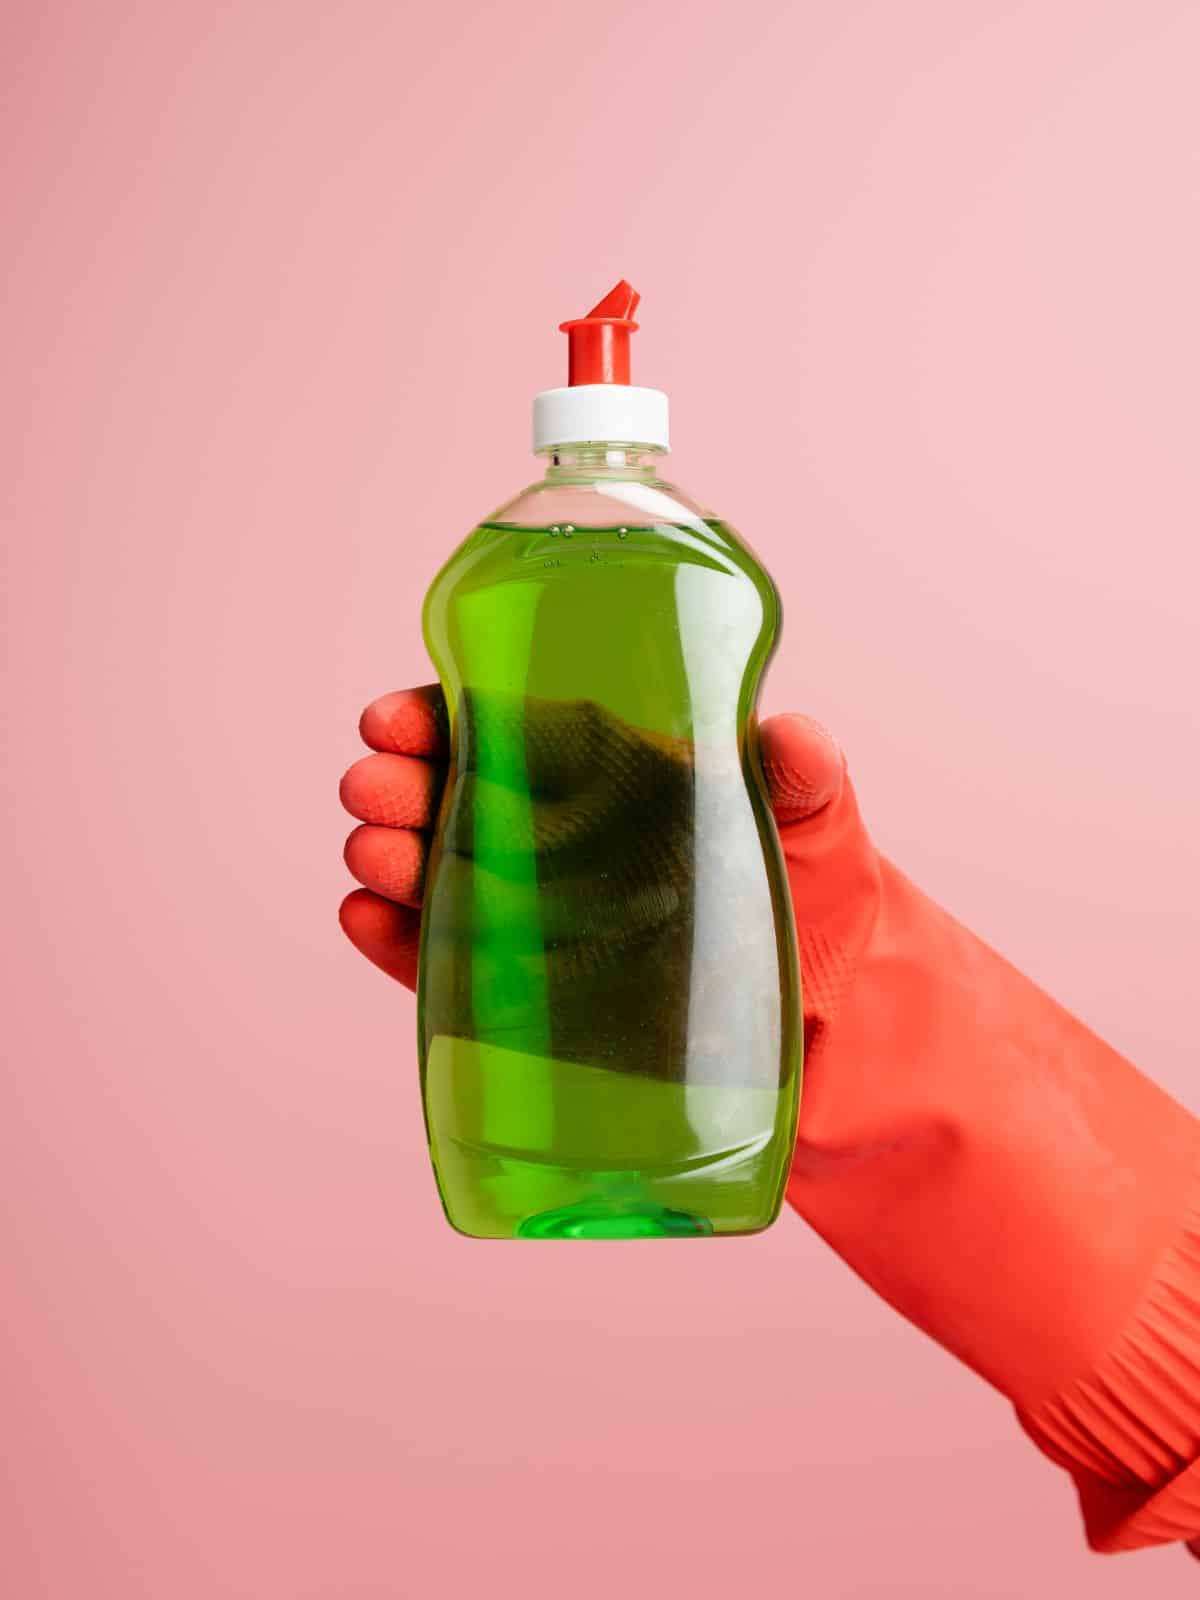 A hand holding a bottle of green dishwashing liquid on a pink background.